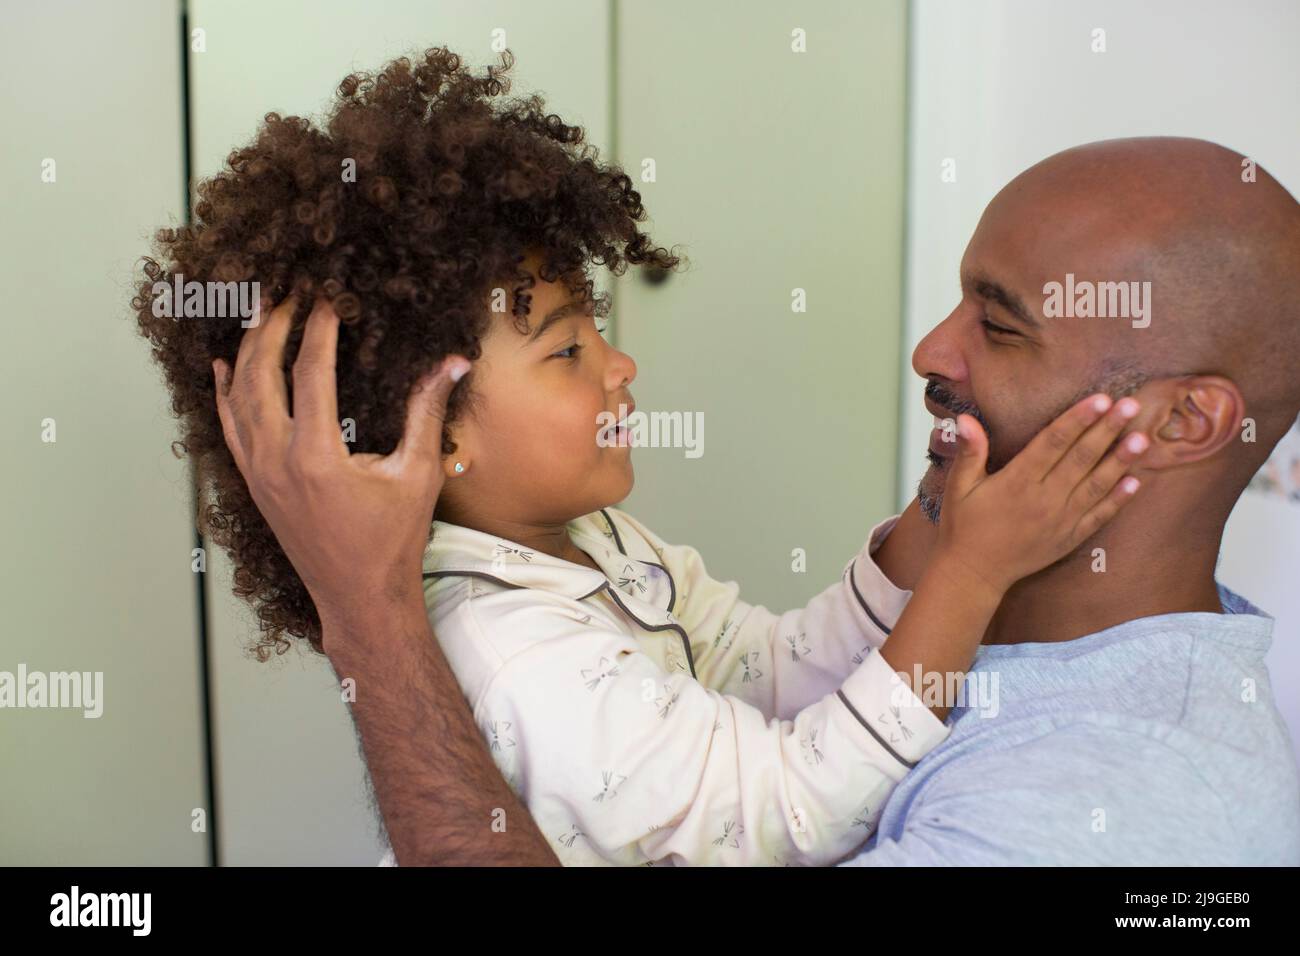 Daughter touching his father's face and looking at each other Stock Photo